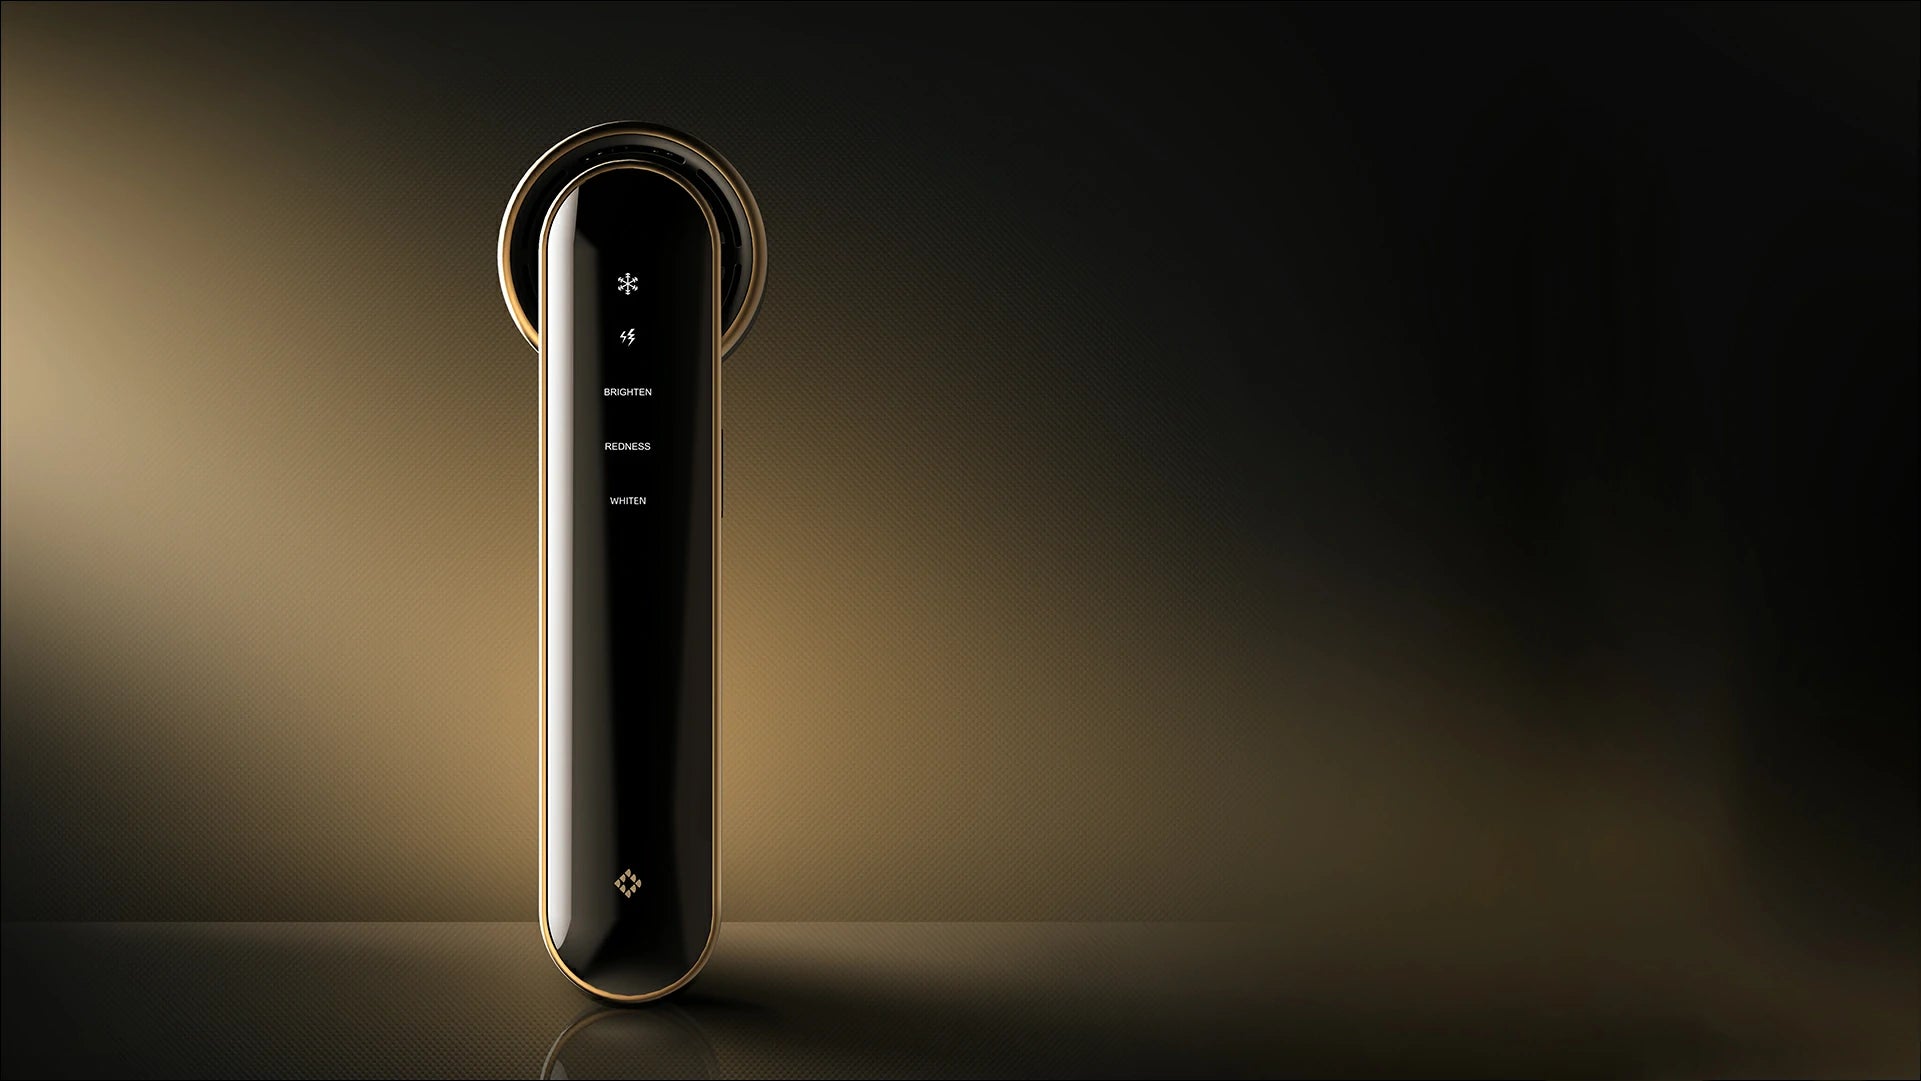 JOVS Blacken Photofacial Skincare Device displayed against an elegant golden gradient background, combining beauty and advanced technology.